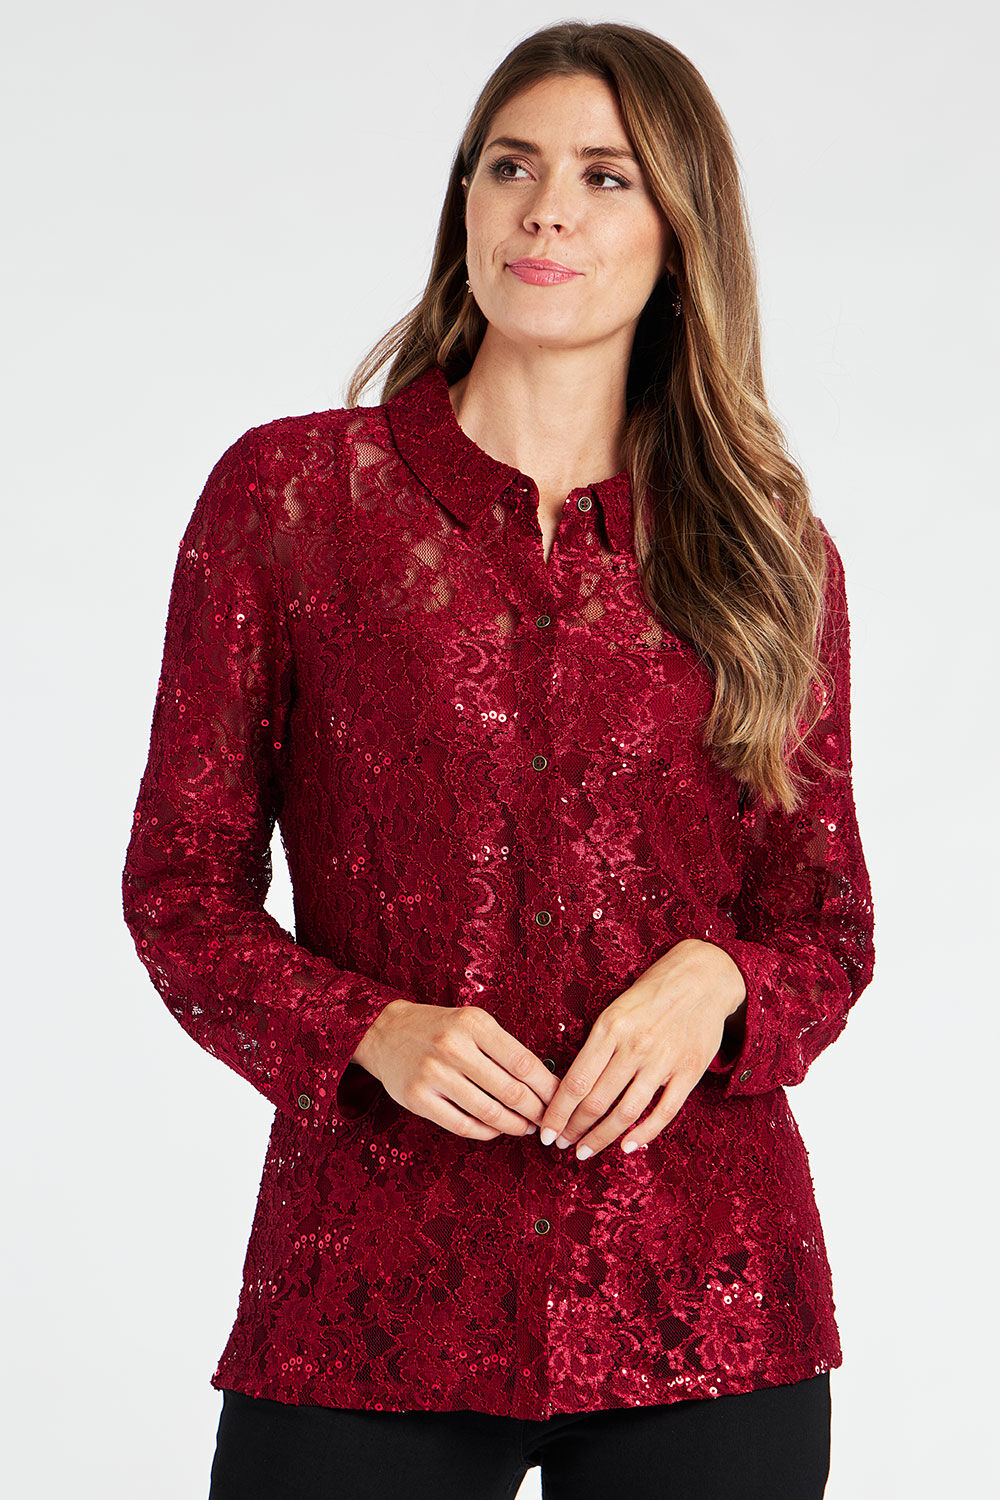 Bonmarche Burgundy Long Sleeve Sequin and Lace Button Through Shirt, Size: 10